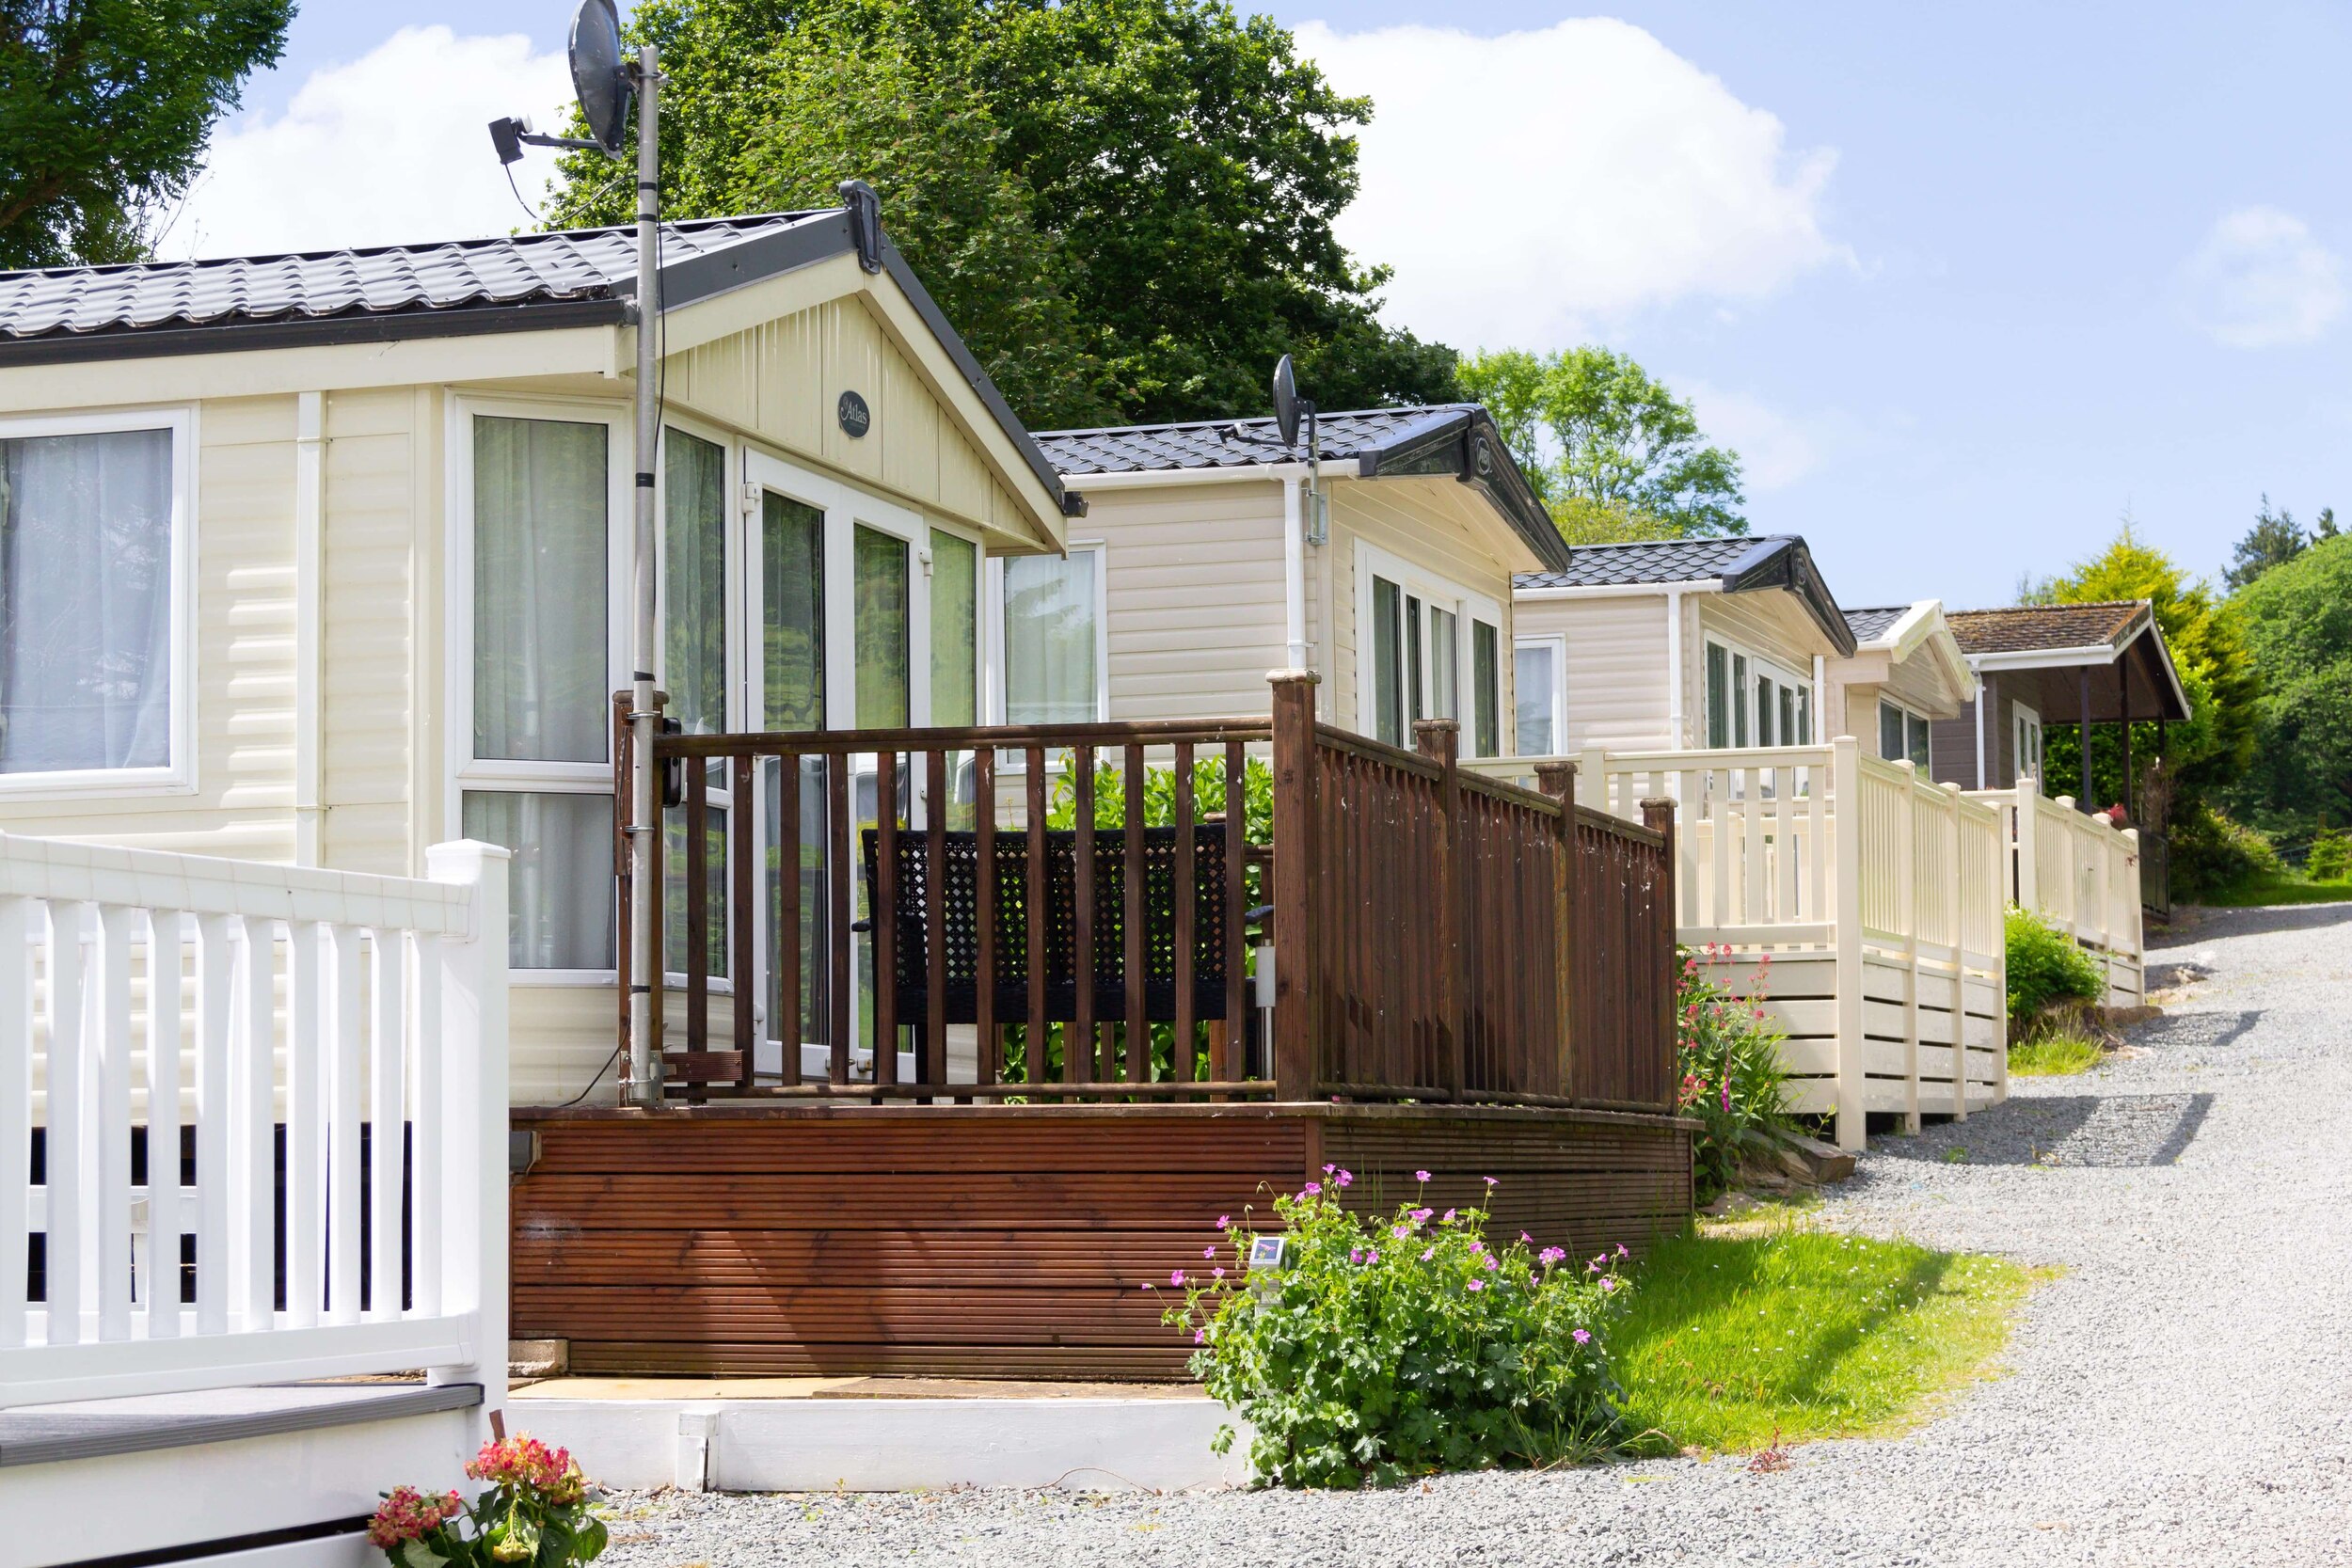 Maintaining Your Static Caravan: 5 Simple Tips